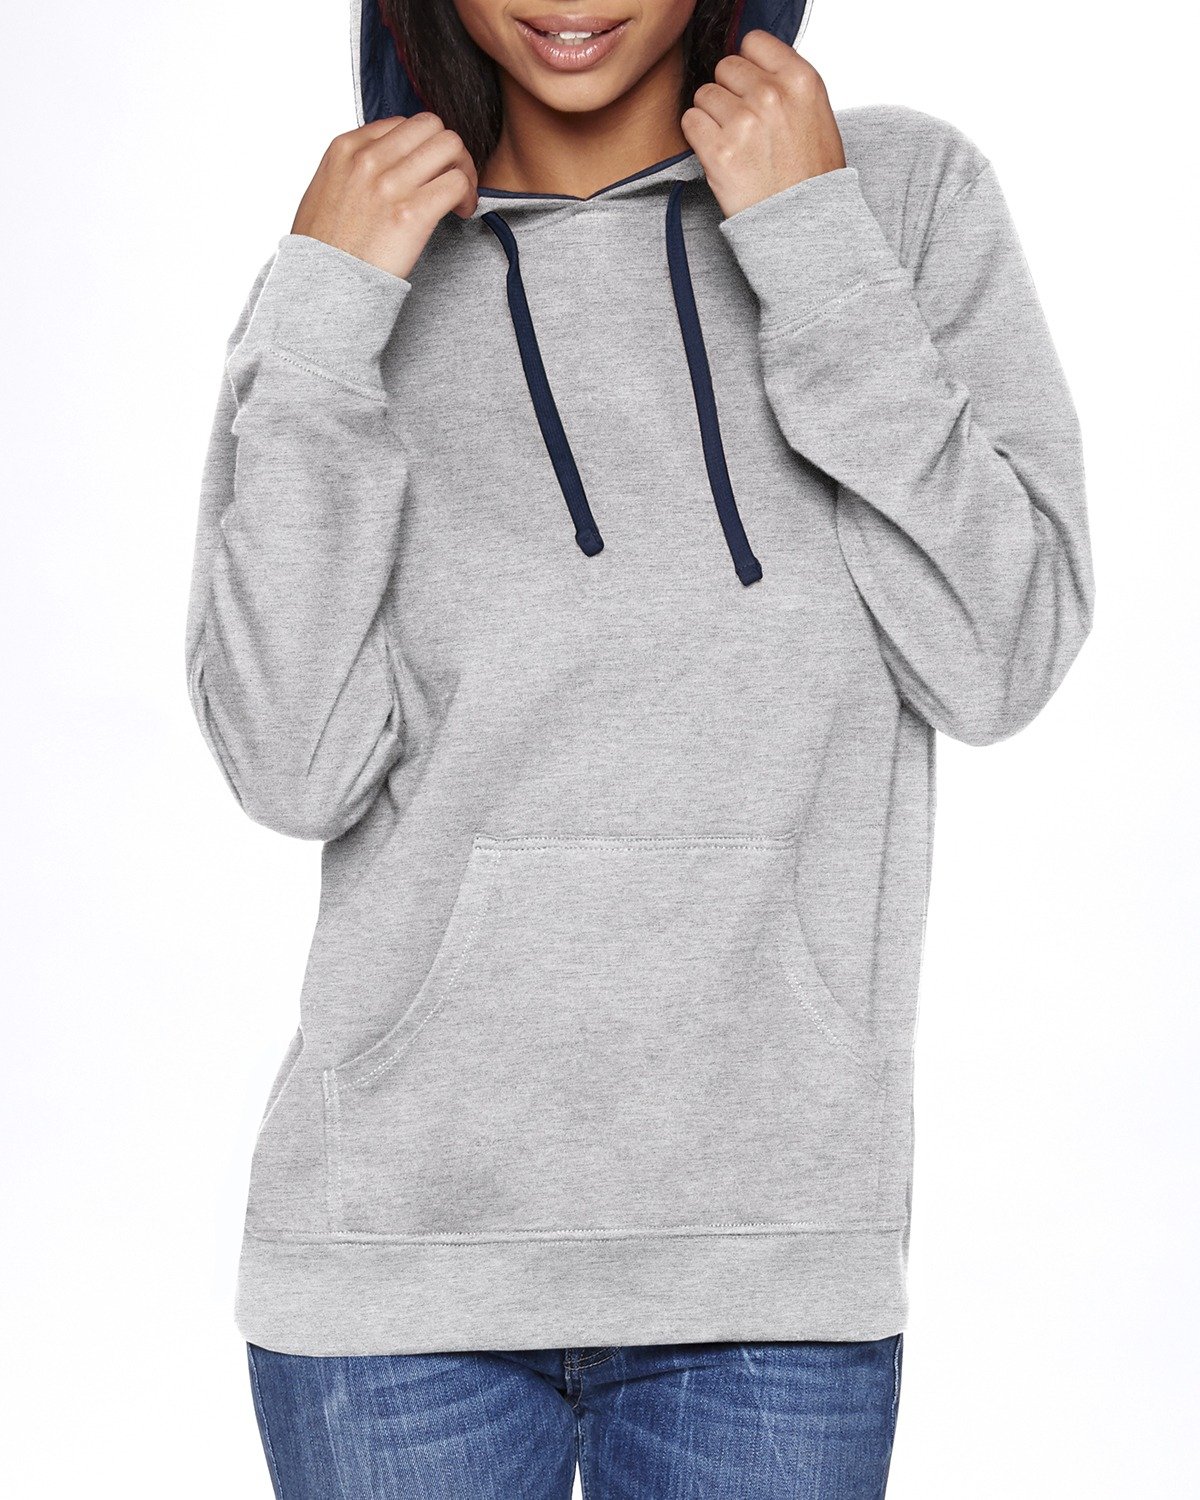 Next Level Apparel Unisex French Terry Pullover Hoodie HTHR GR/MID NY 